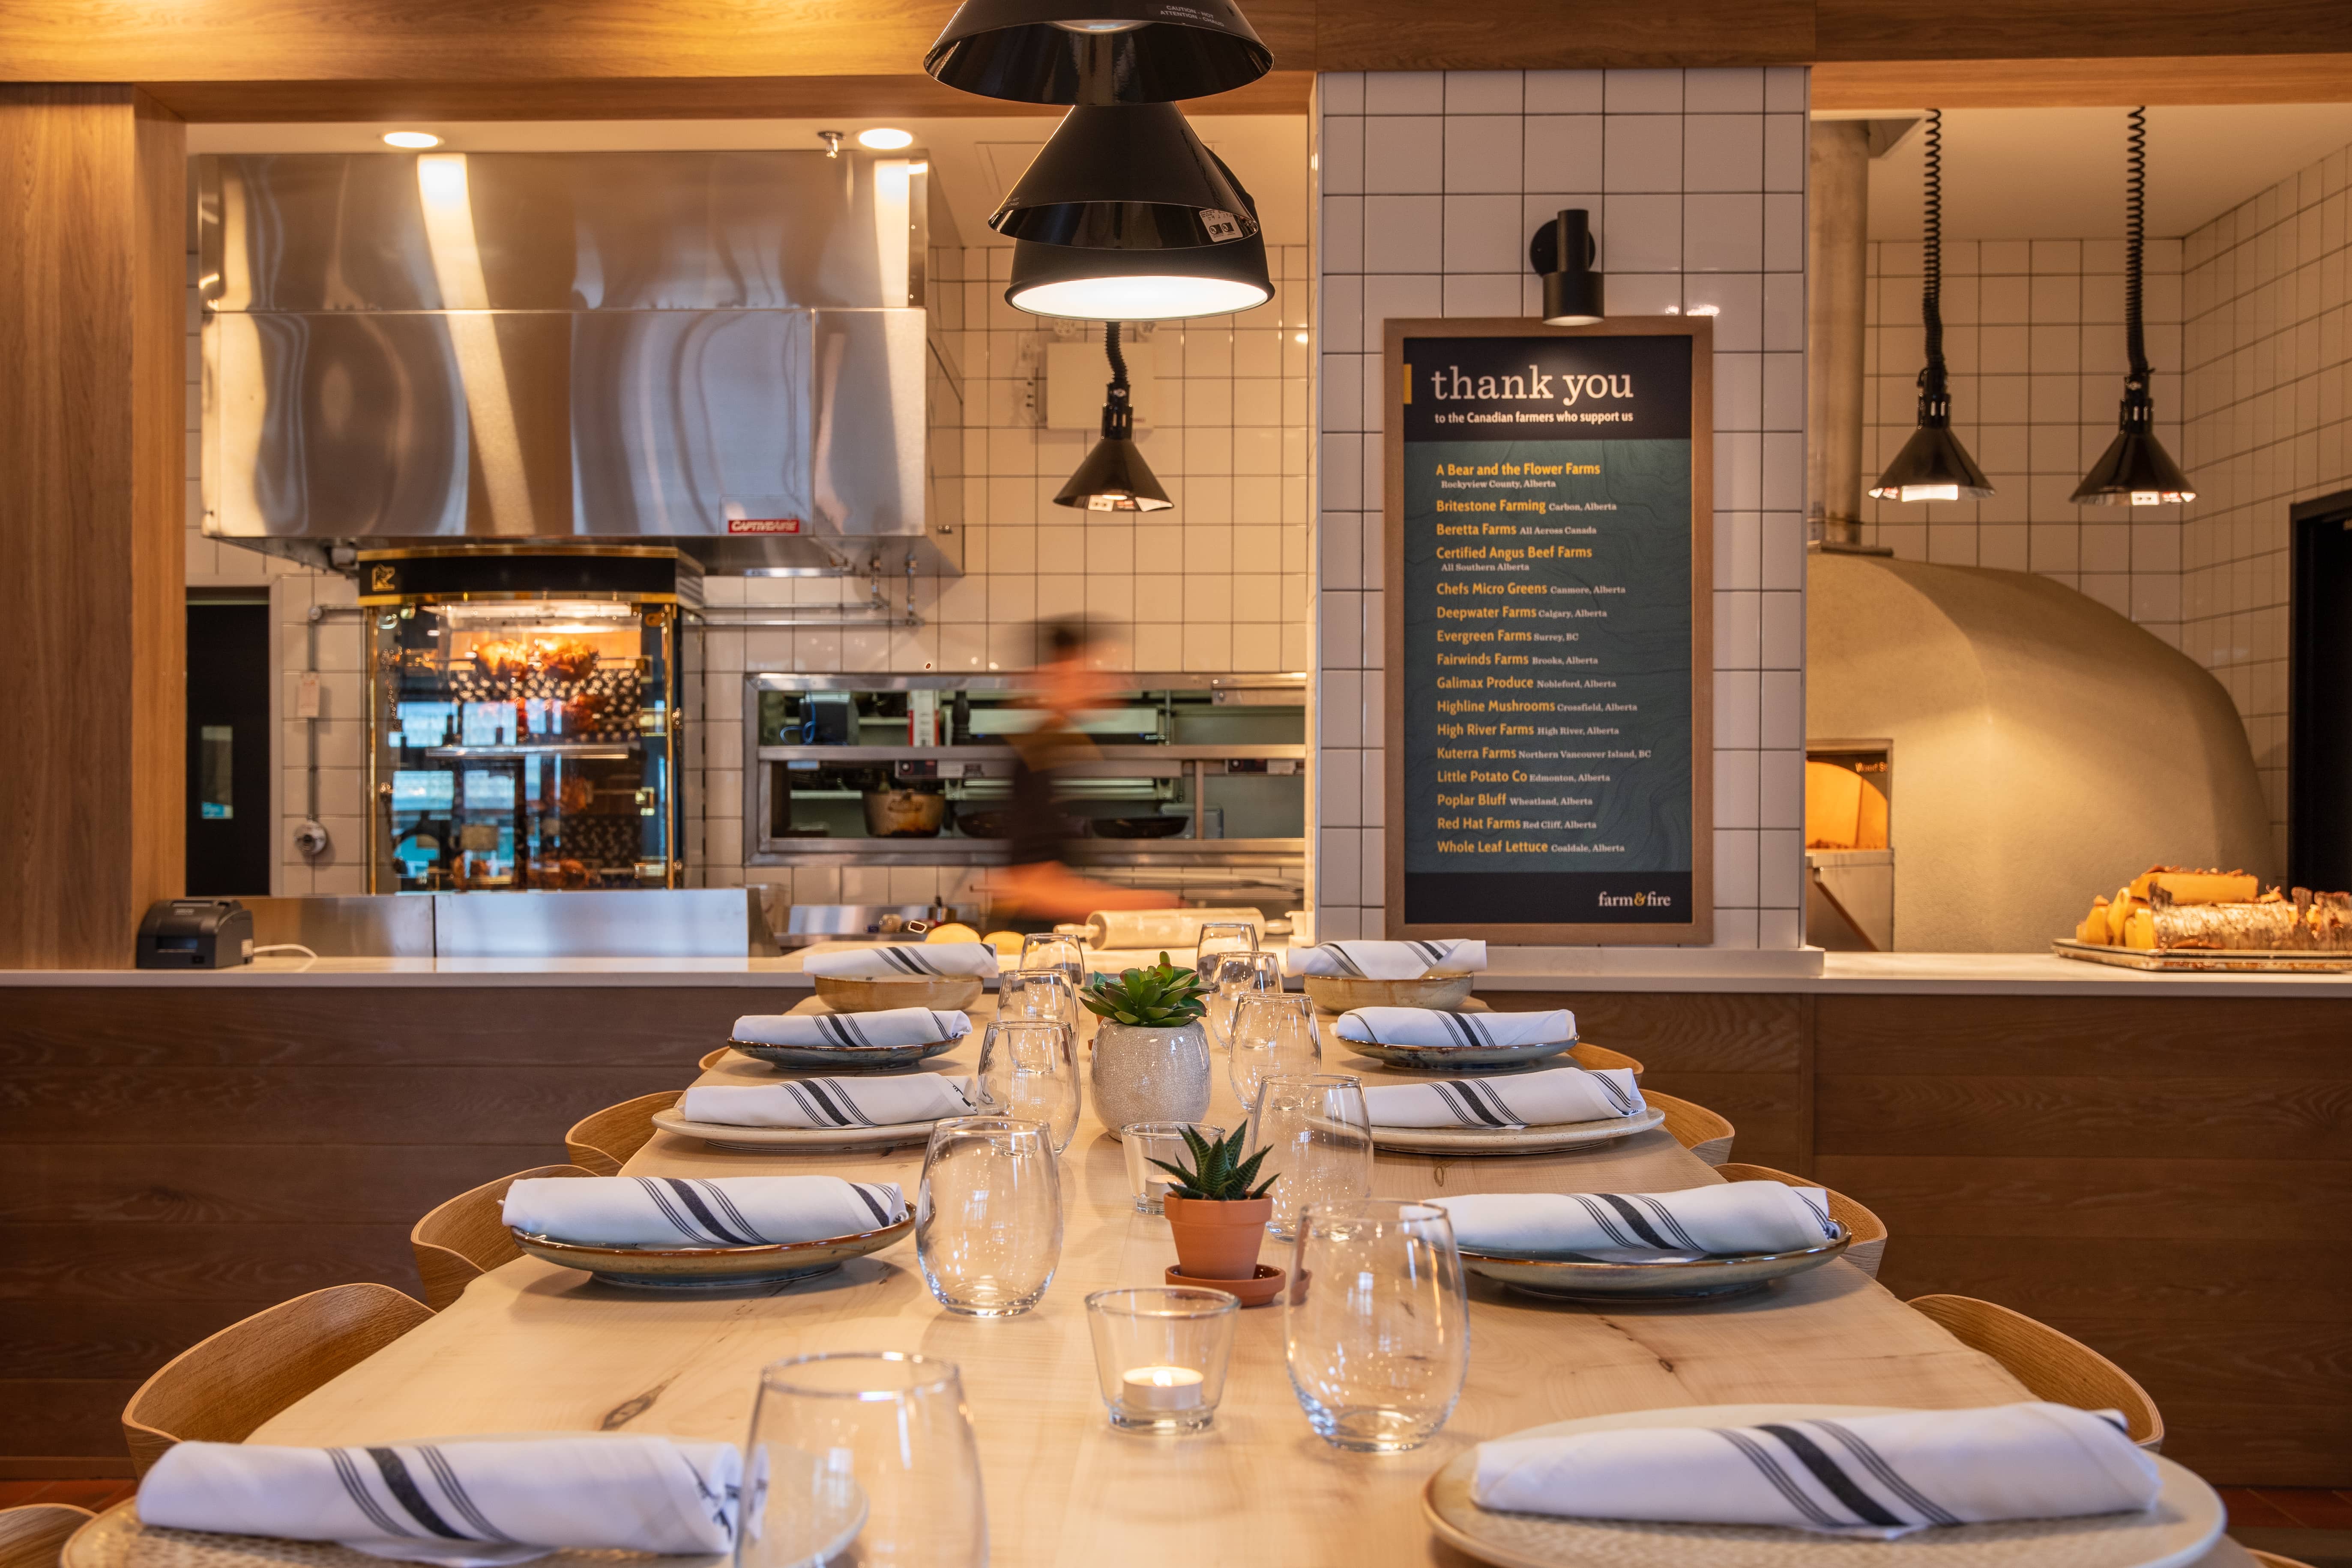 The open-concept kitchen at Farm & Fire, and a table set for a large group.